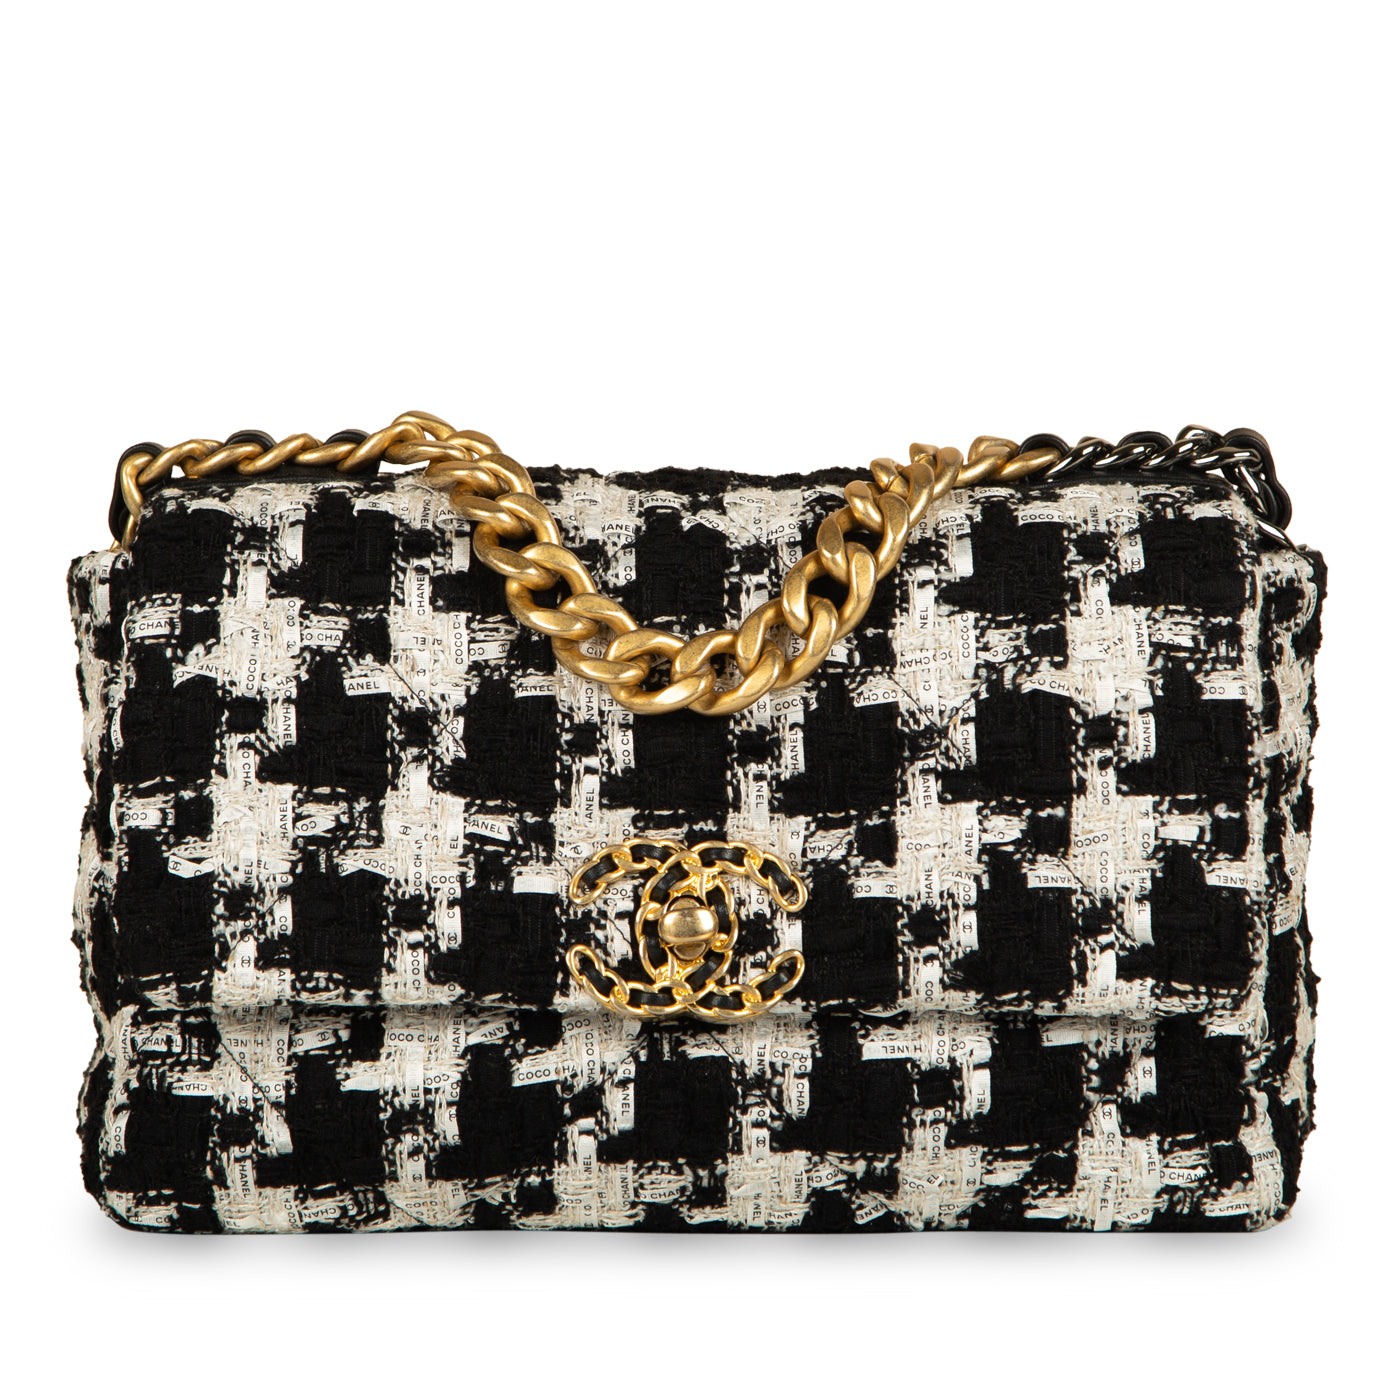 Chanel 19 Large, Black and White Houndstooth Tweed, Preowned